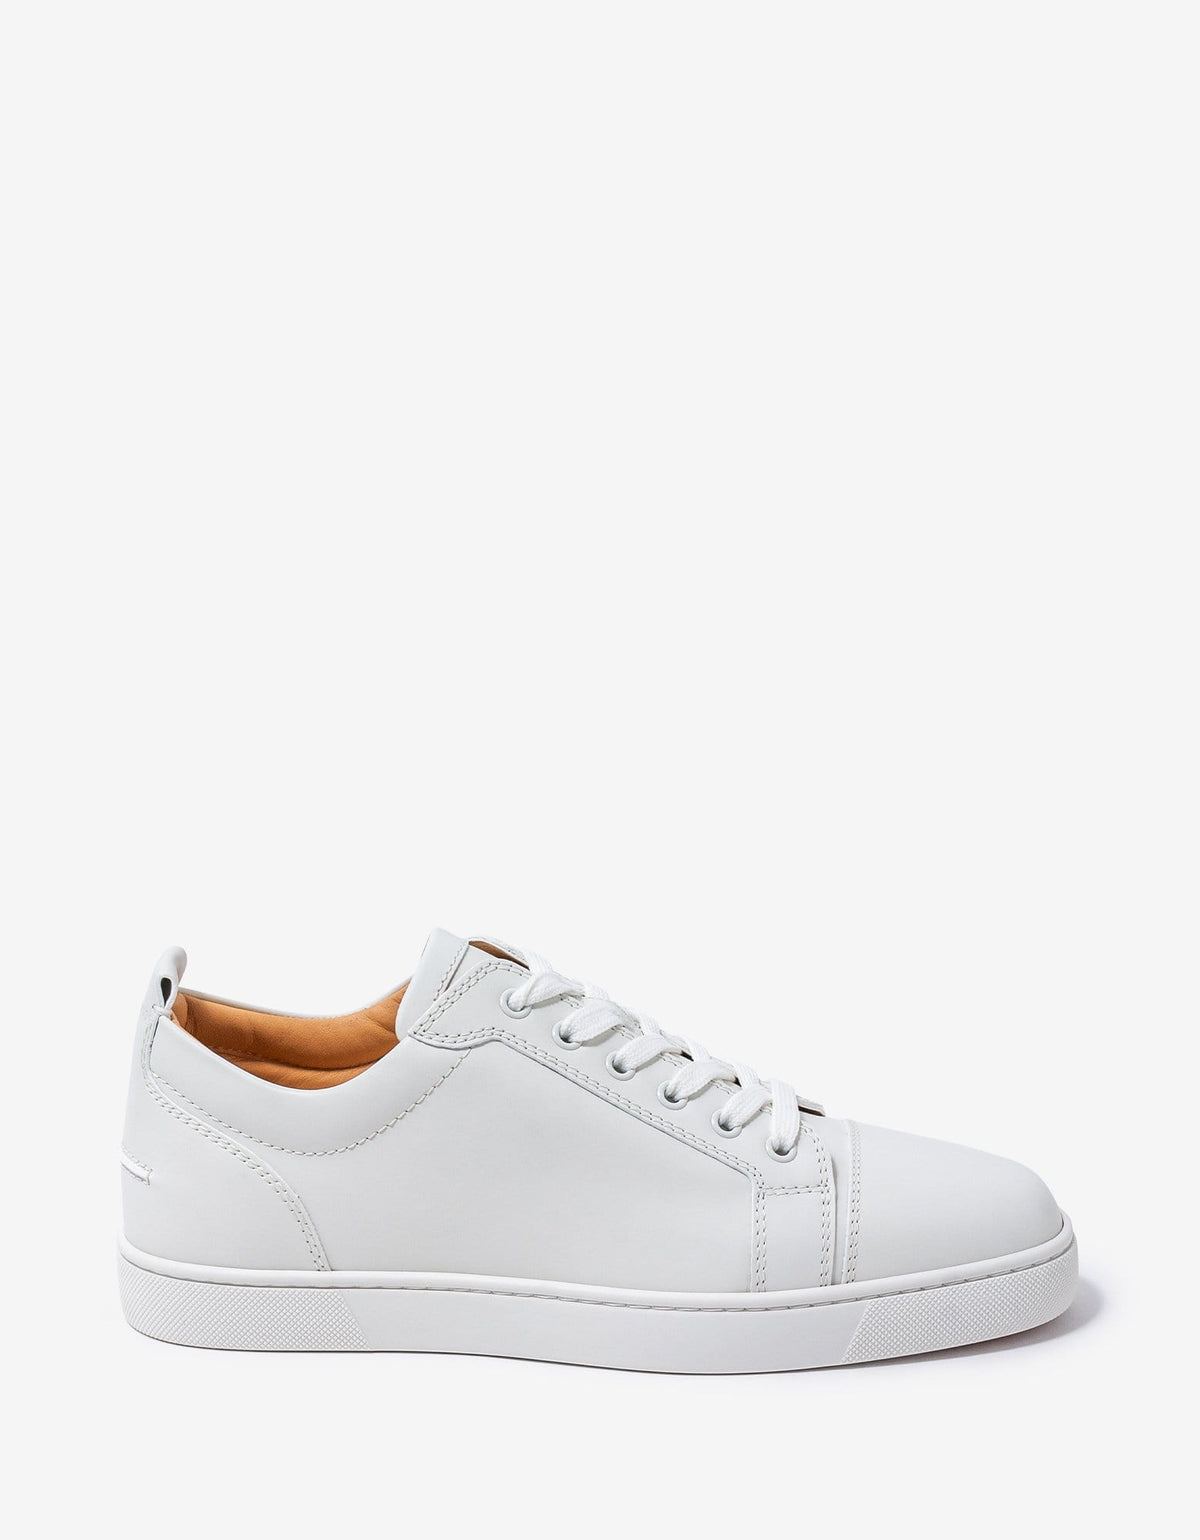 Christian Louboutin - Louis Junior White Leather Trainers -